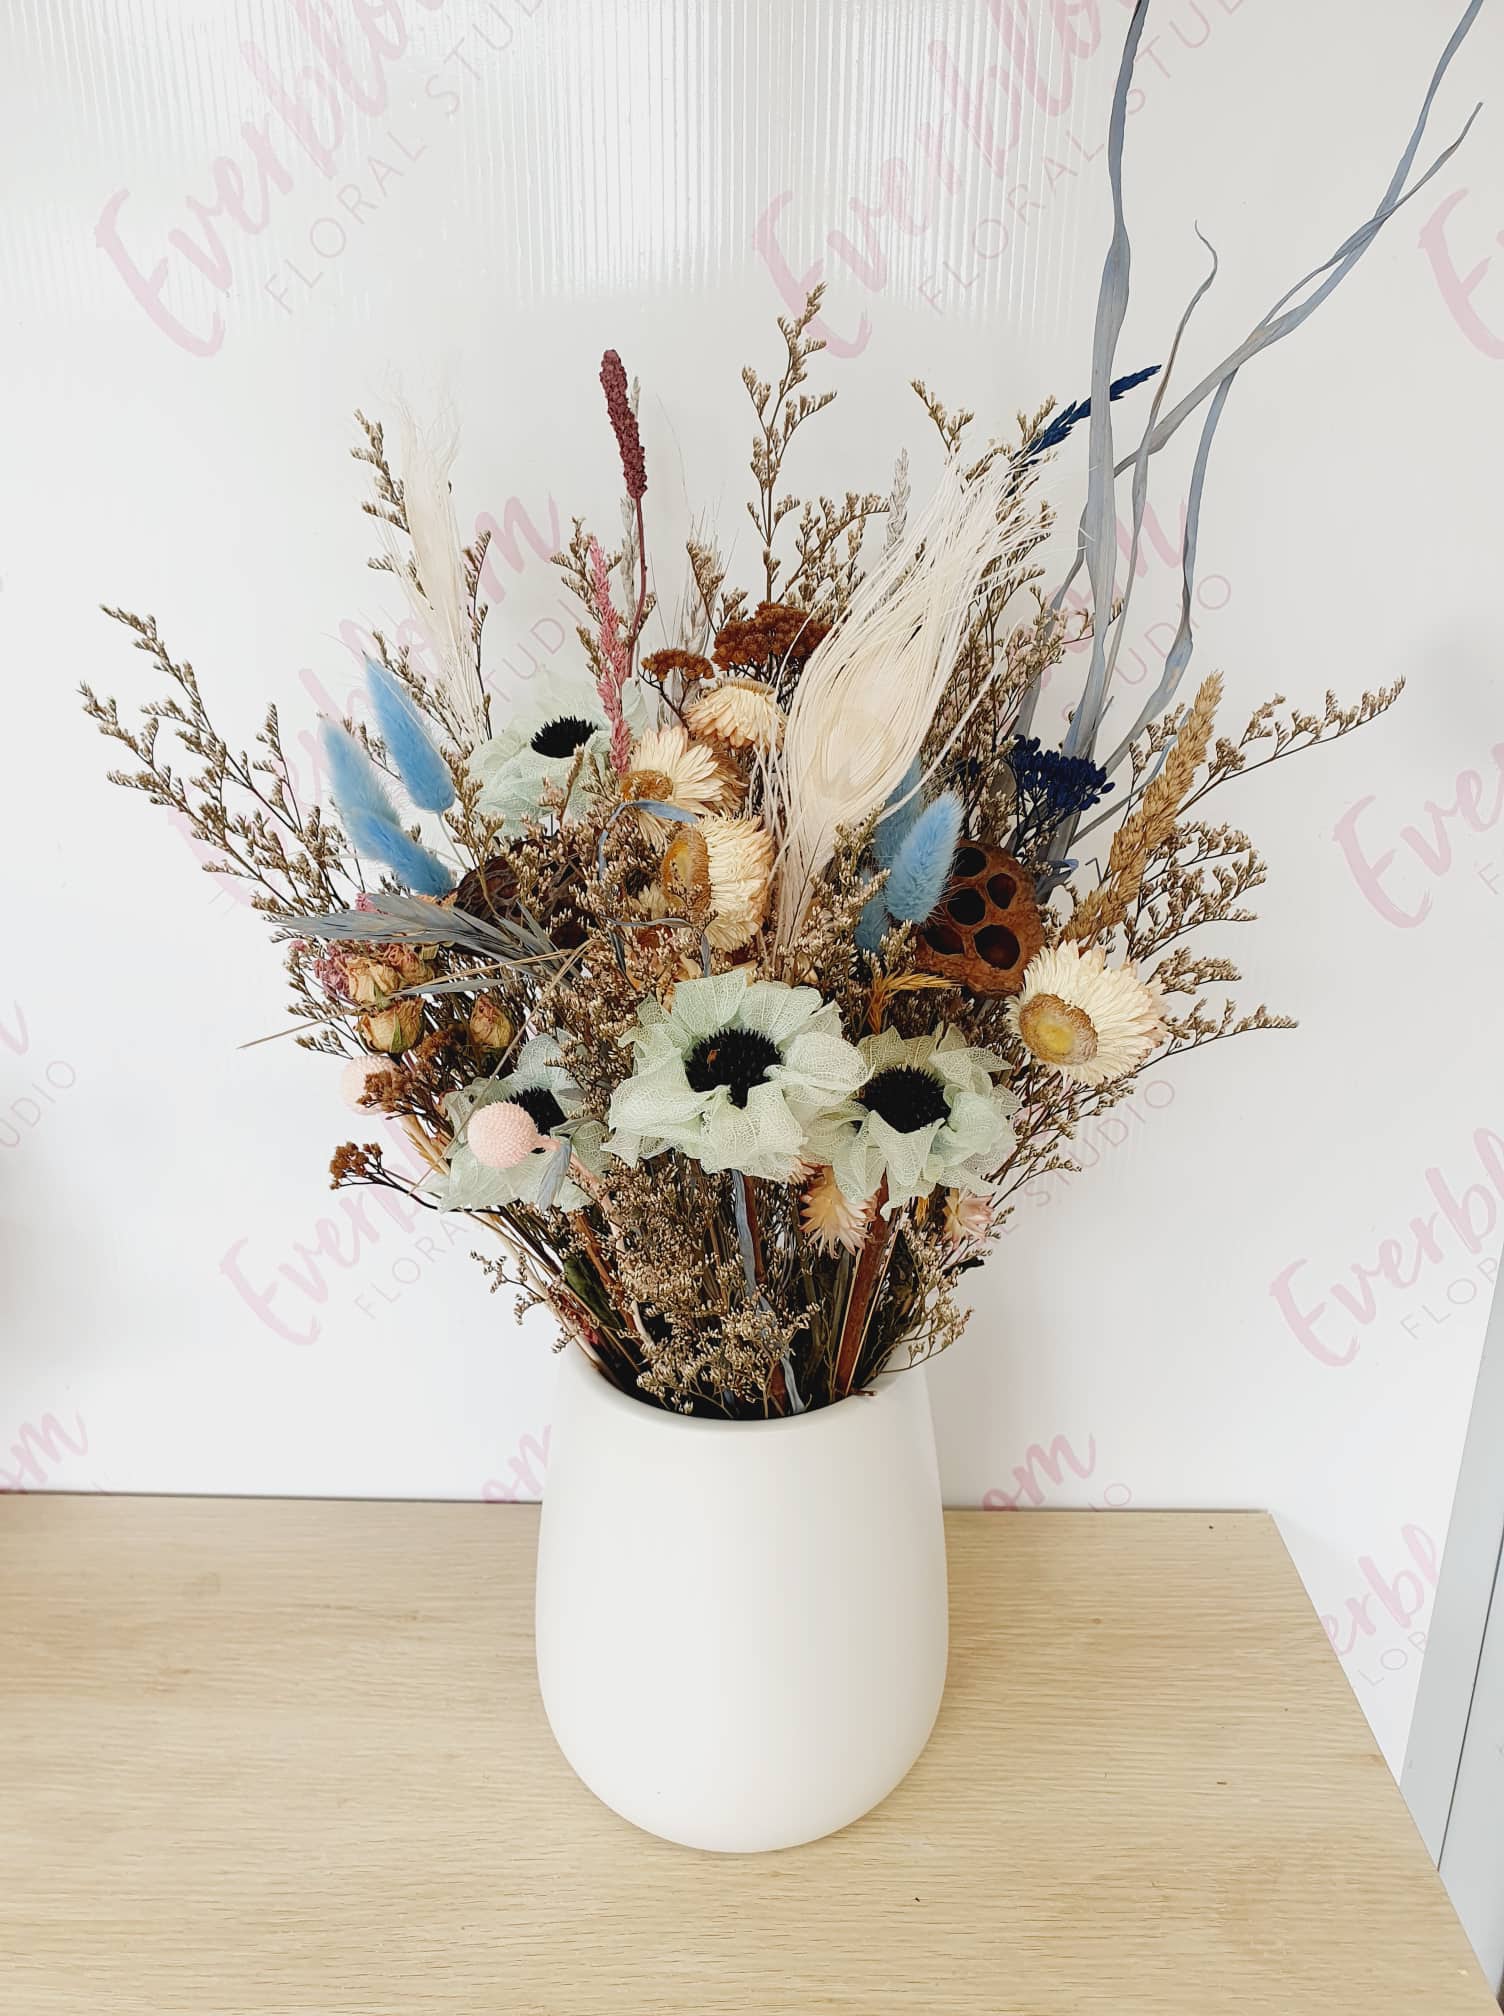 Our dried flower arrangements now come in white vases, Simply receive, display and enjoy, no fuss finding the right height vase for your flowers. Dried arrangements may slightly vary due to availability and colour but for the most part will stay similar to the pictures provided. A mix of strawflowers, caspea, spray roses, anenomes, lotus pods and wild flowers. Same day flower delivery from our sunny mount maunganui floral studio.